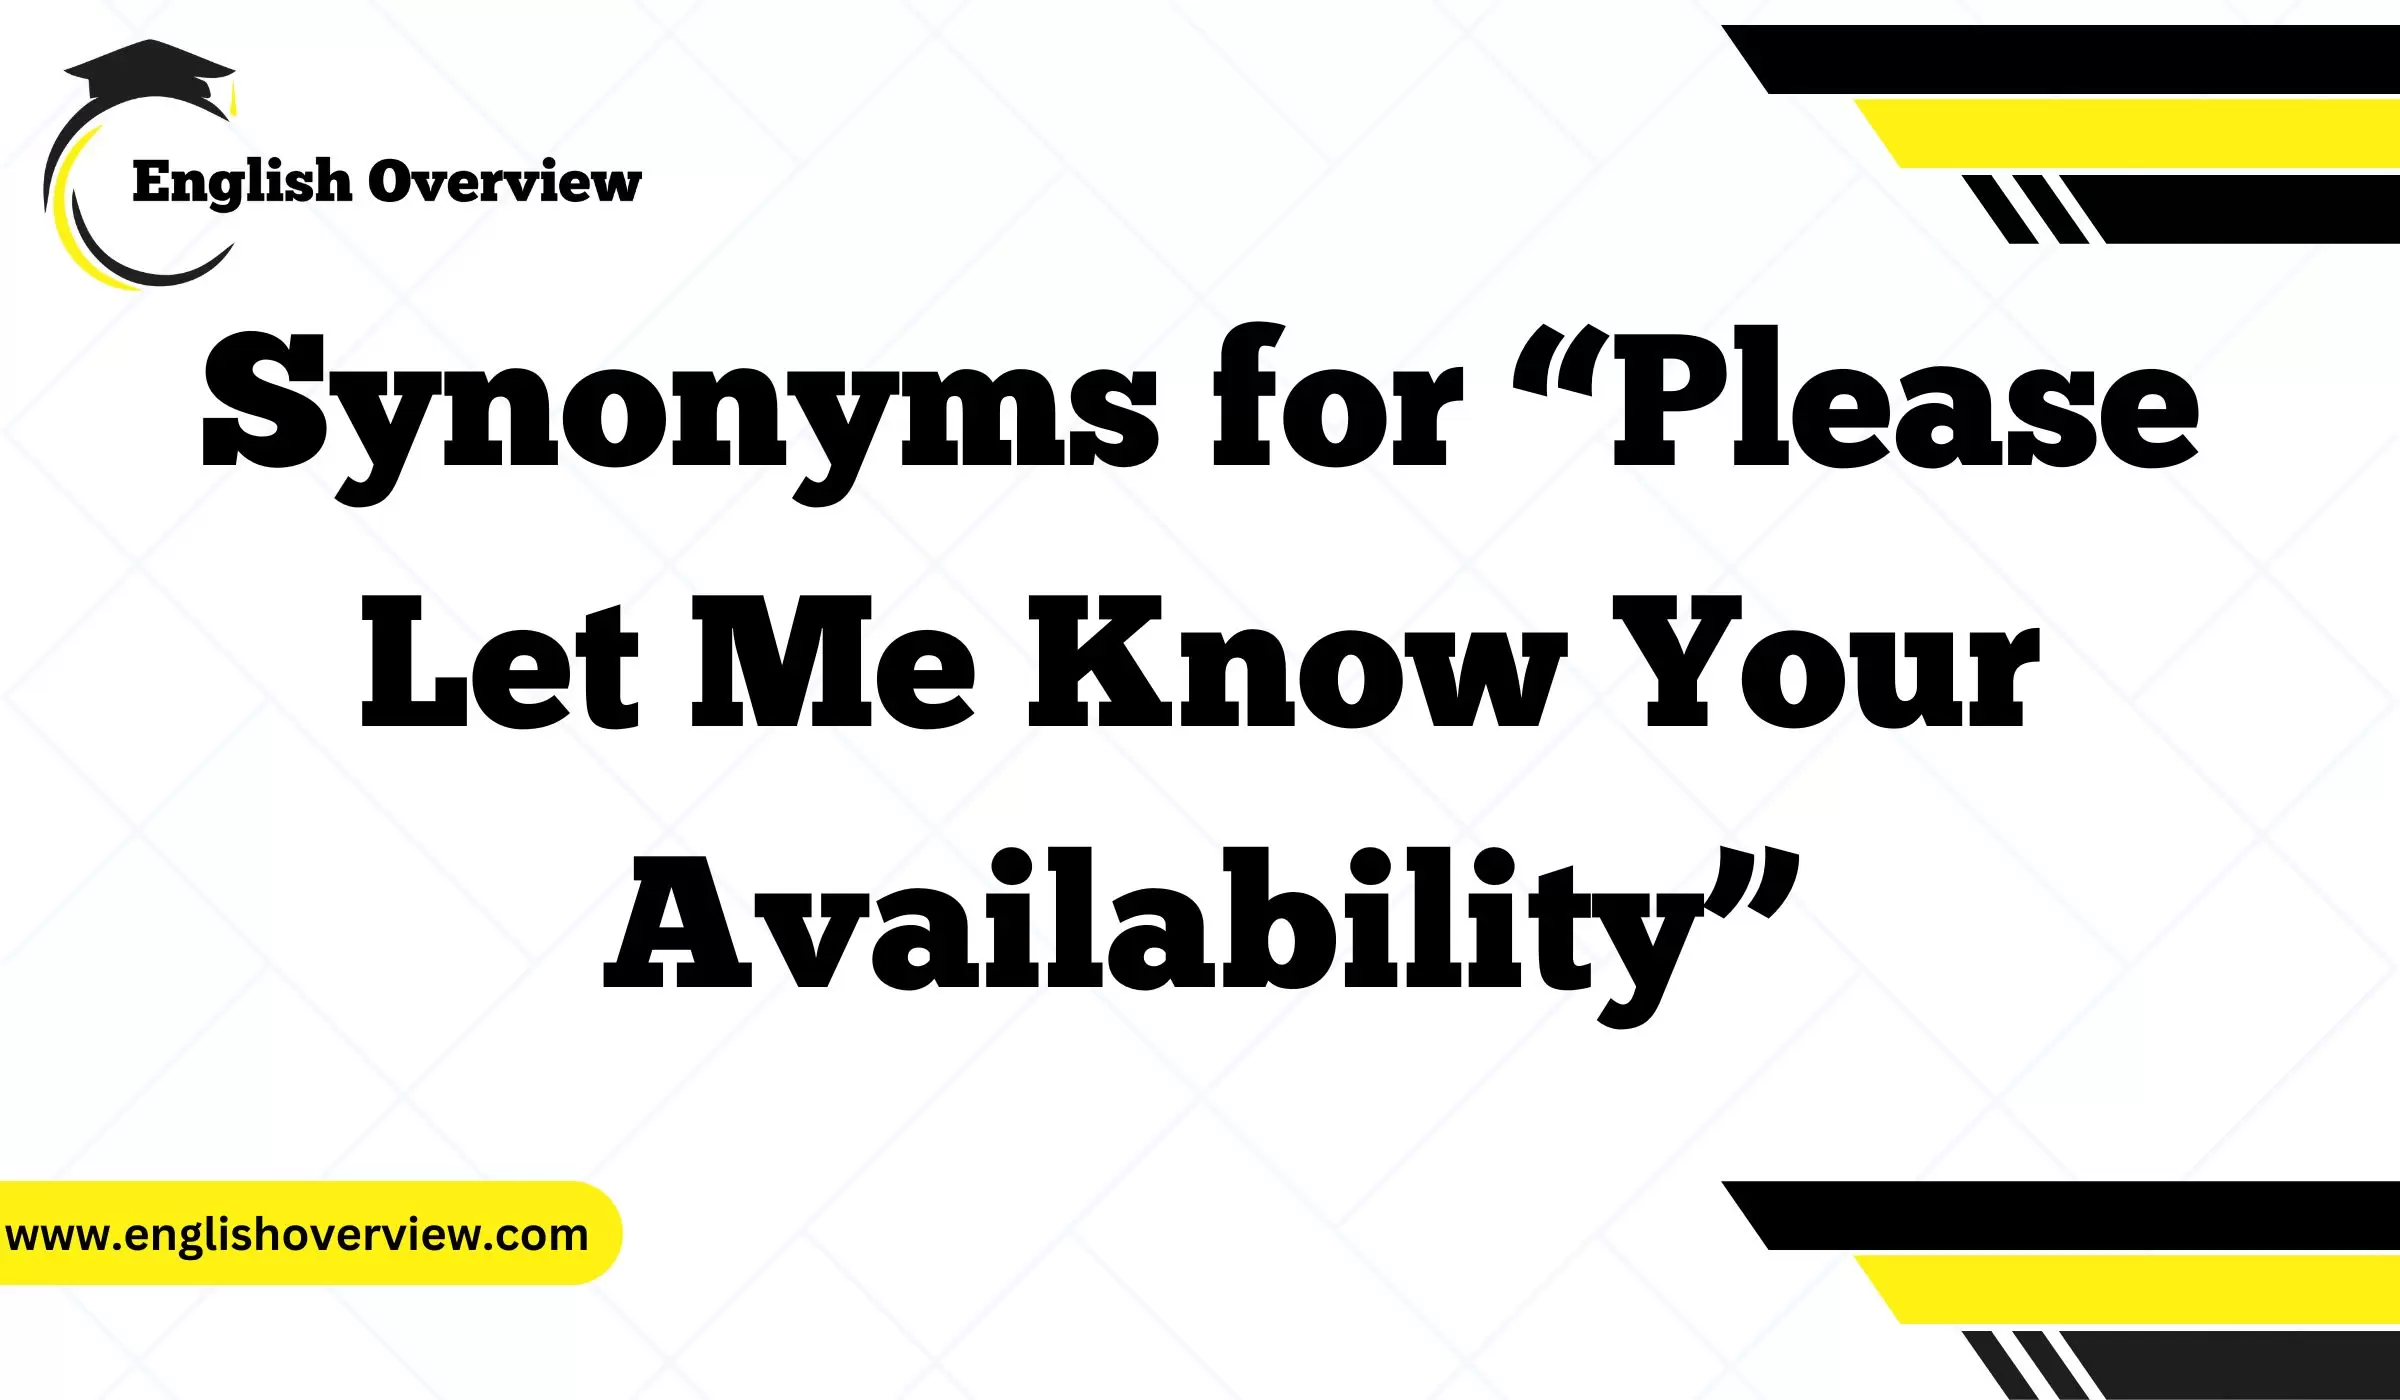 Synonyms for “Please Let Me Know Your Availability”